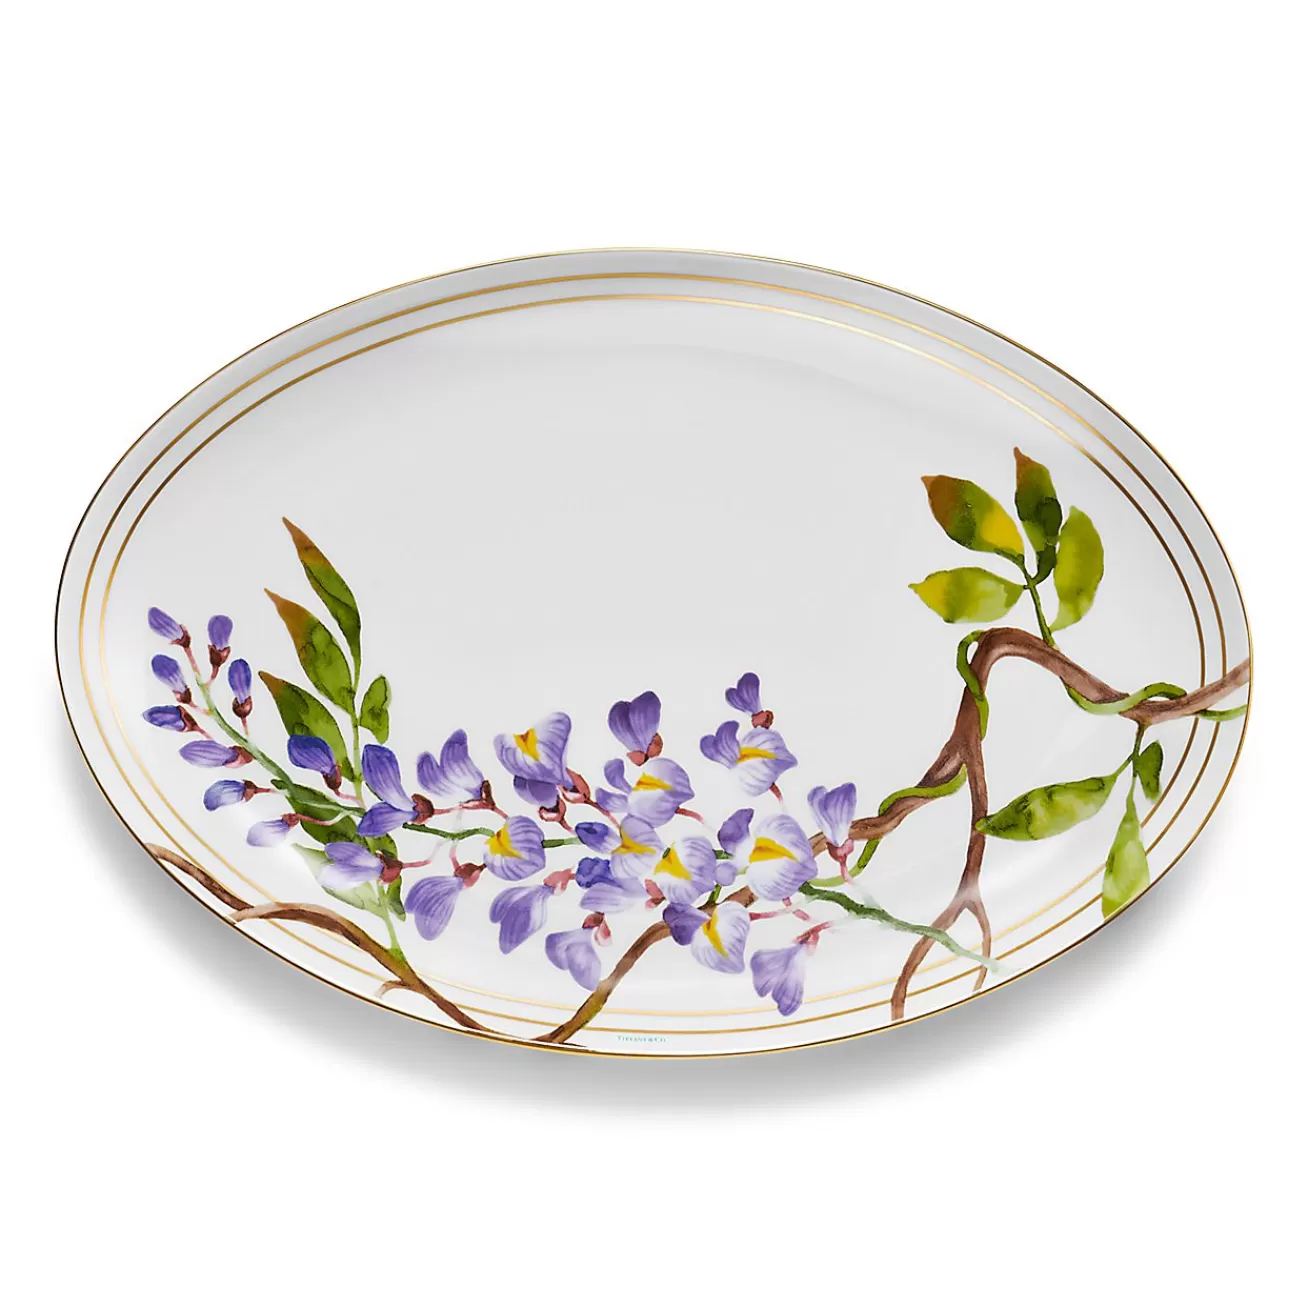 Tiffany & Co. Tiffany Wisteria Serving Plate in Porcelain | ^ Tableware